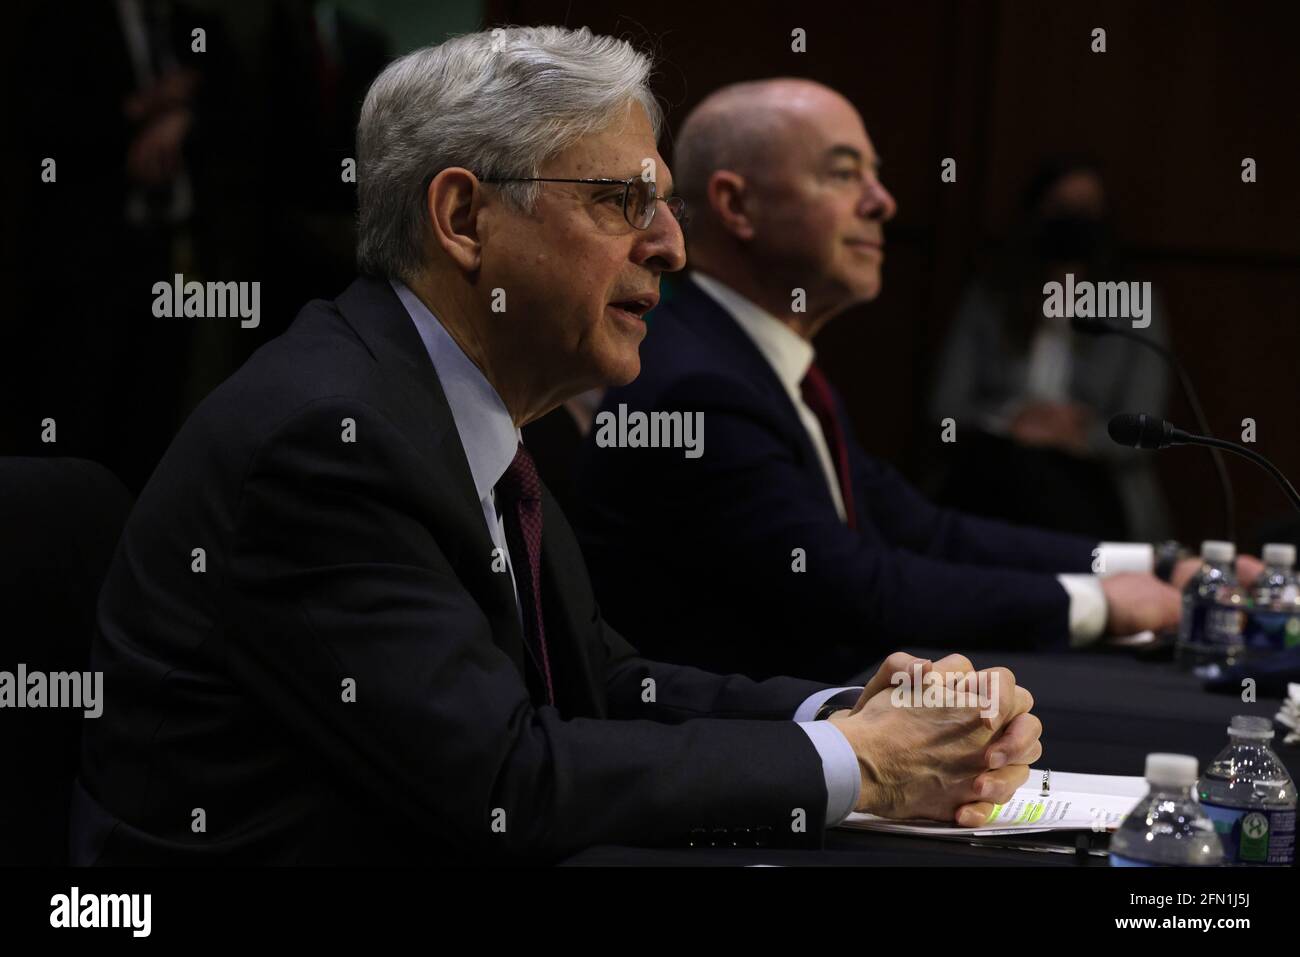 (210513) -- WASHINGTON, May 13, 2021 (Xinhua) -- U.S. Attorney General Merrick Garland (L) and Homeland Security Secretary Alejandro Mayorkas testify before a Senate Appropriations Committee hearing to examine domestic violent extremism in America in Washington, DC, the United States, on May 12, 2021. (Alex Wong/Pool via Xinhua) Stock Photo